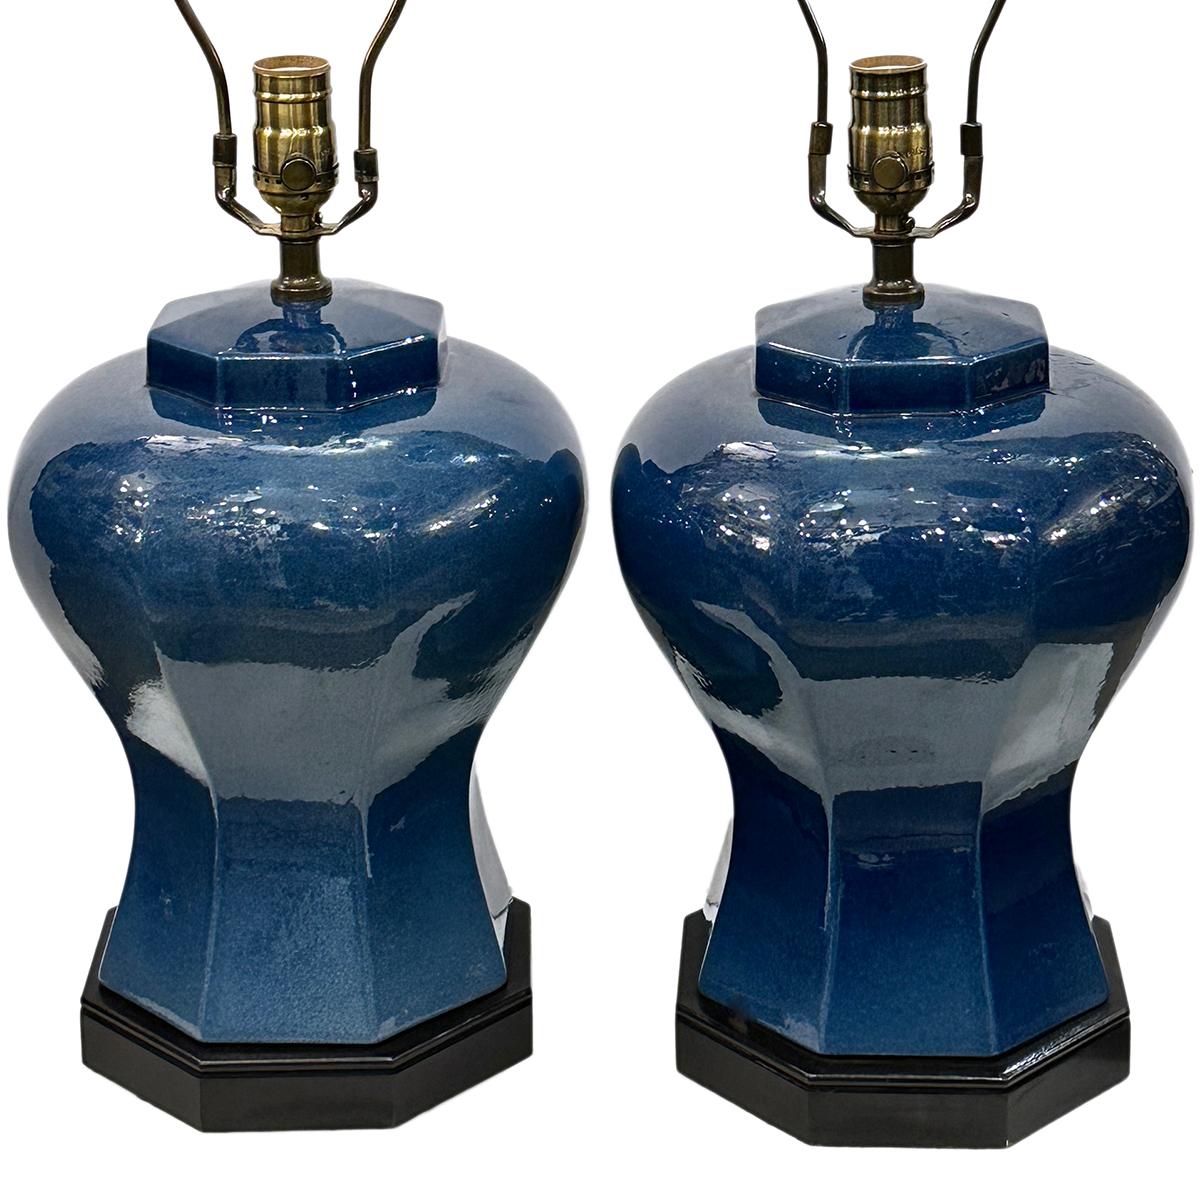 Pair of circa 1960's French porcelain blue lamps.

Measurements:
Height of body: 14